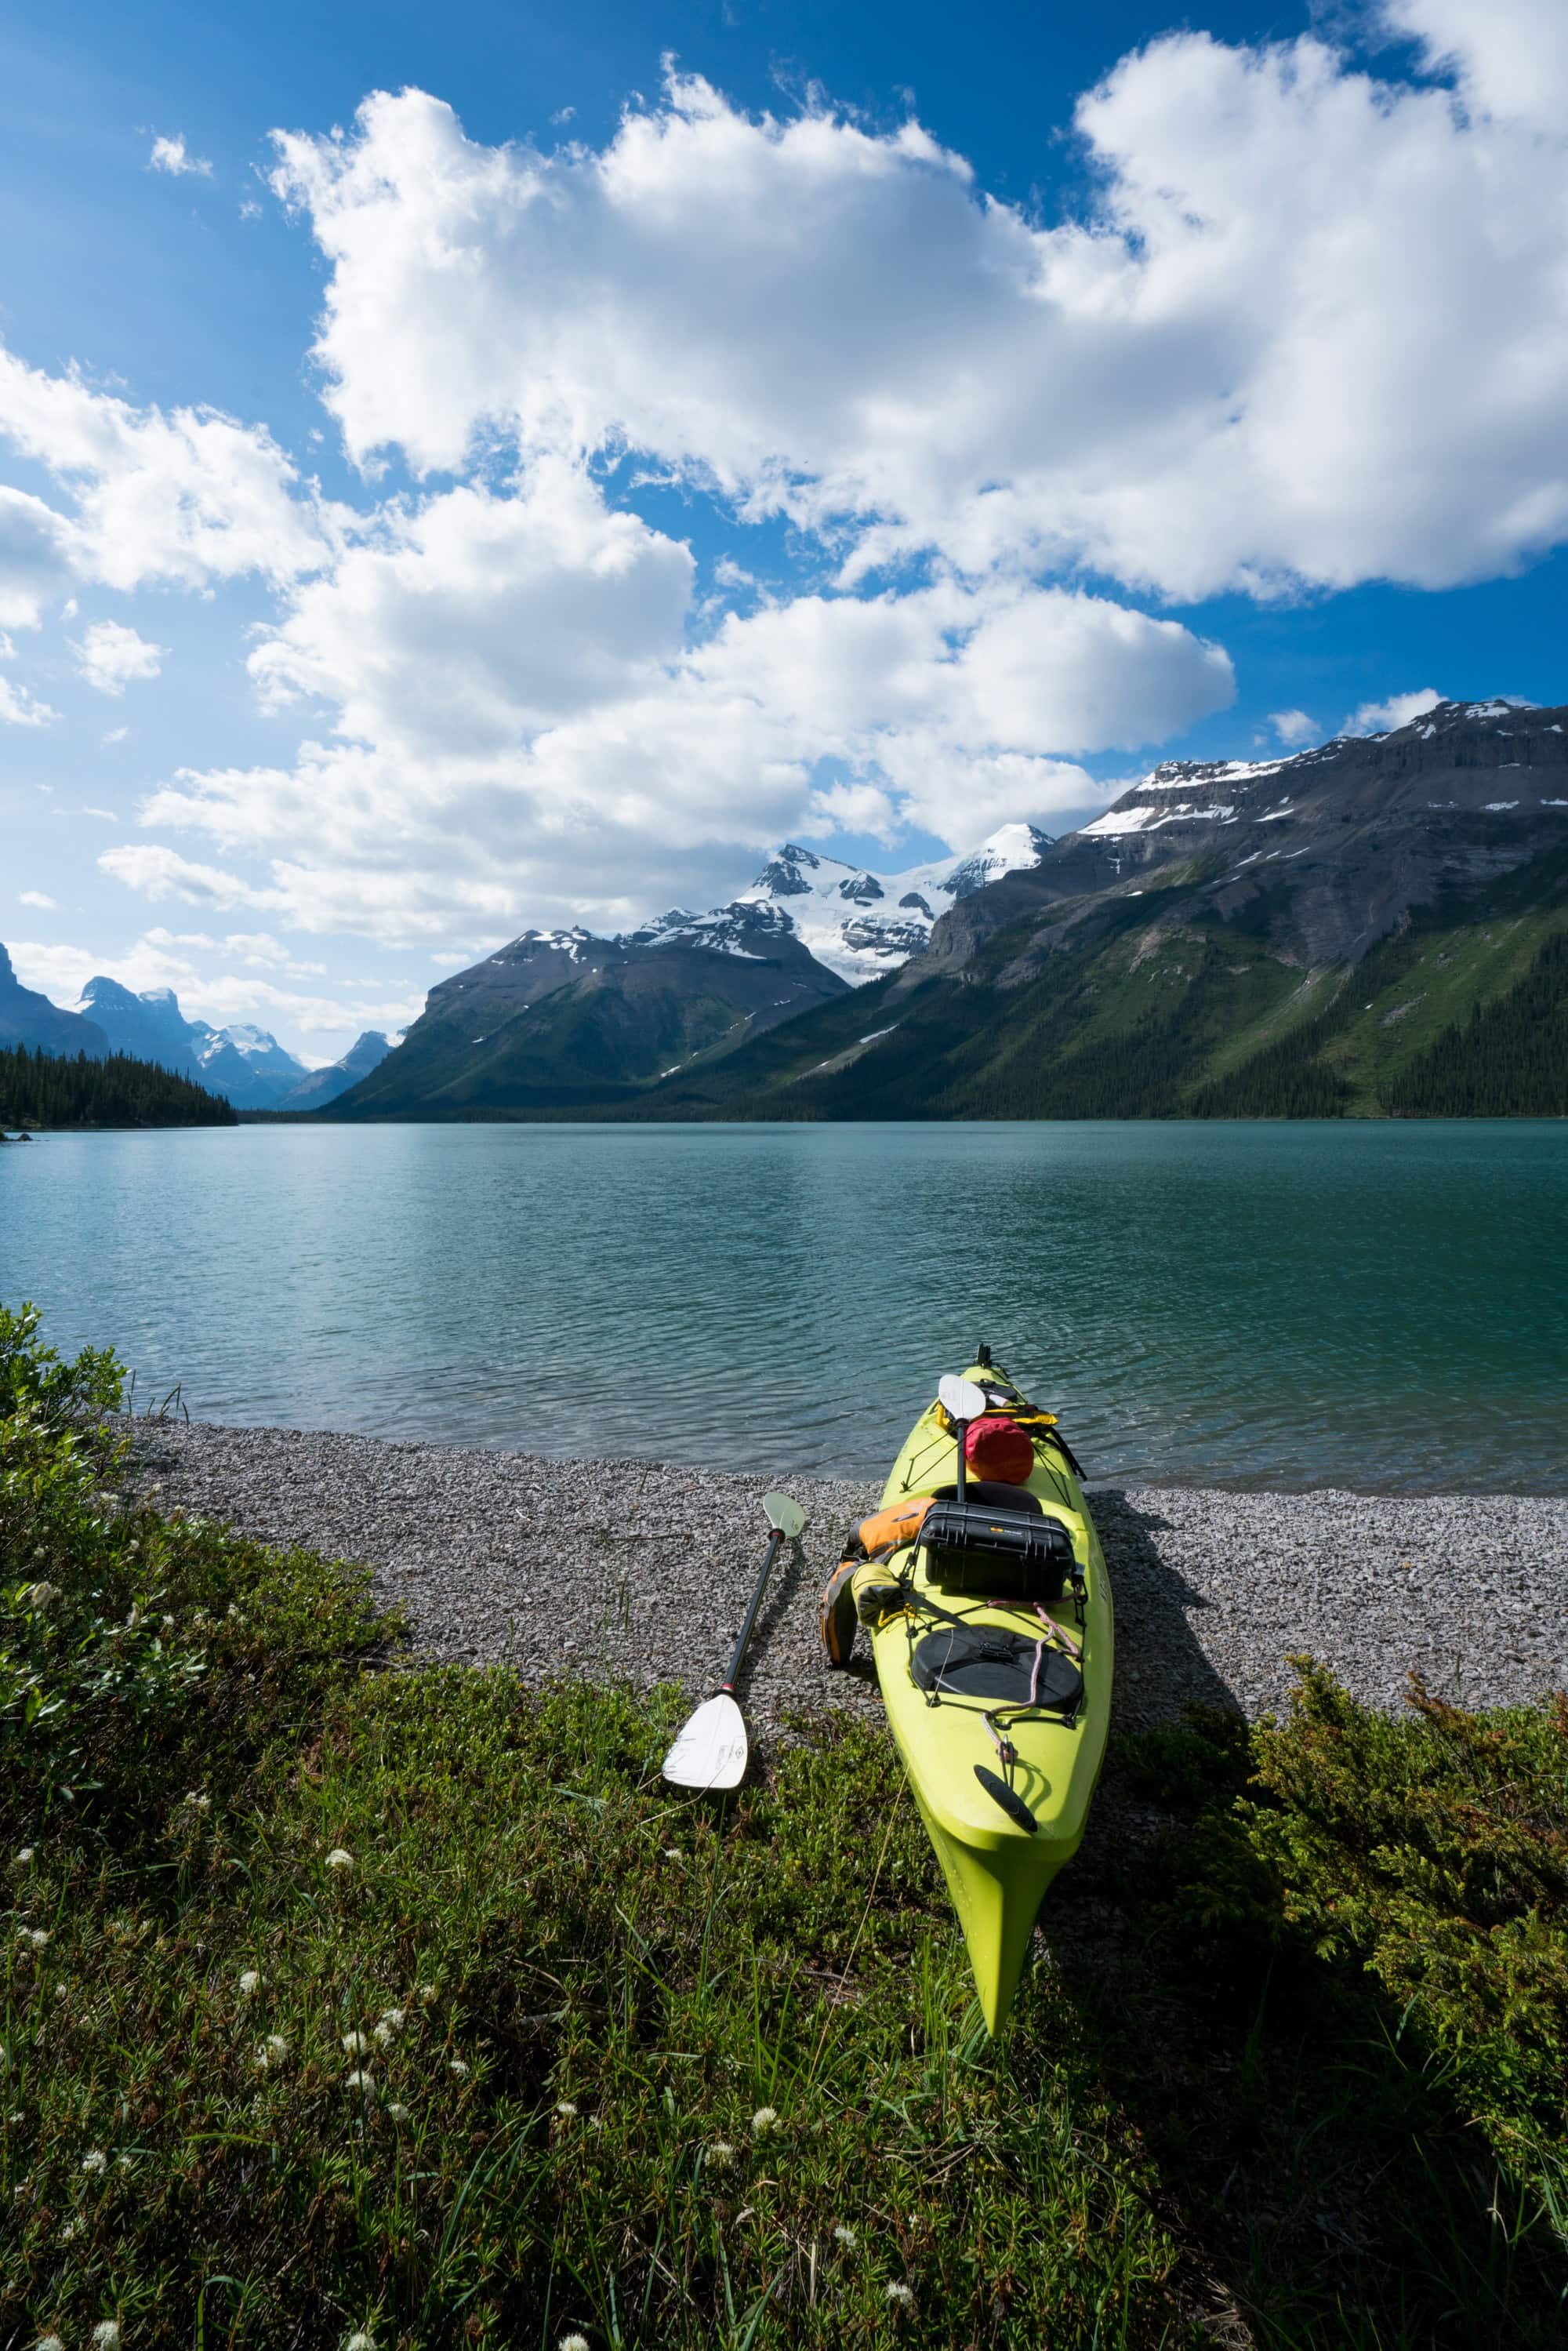 Explore turquoise waters, glacial mountains and secluded camping on an overnight Maligne Lake Kayaking Trip in Alberta's Jasper National Park. Learn how to plan with a full trip report and information on backcountry campsite reservations, kayak rentals, itinerary recommendations & more. 